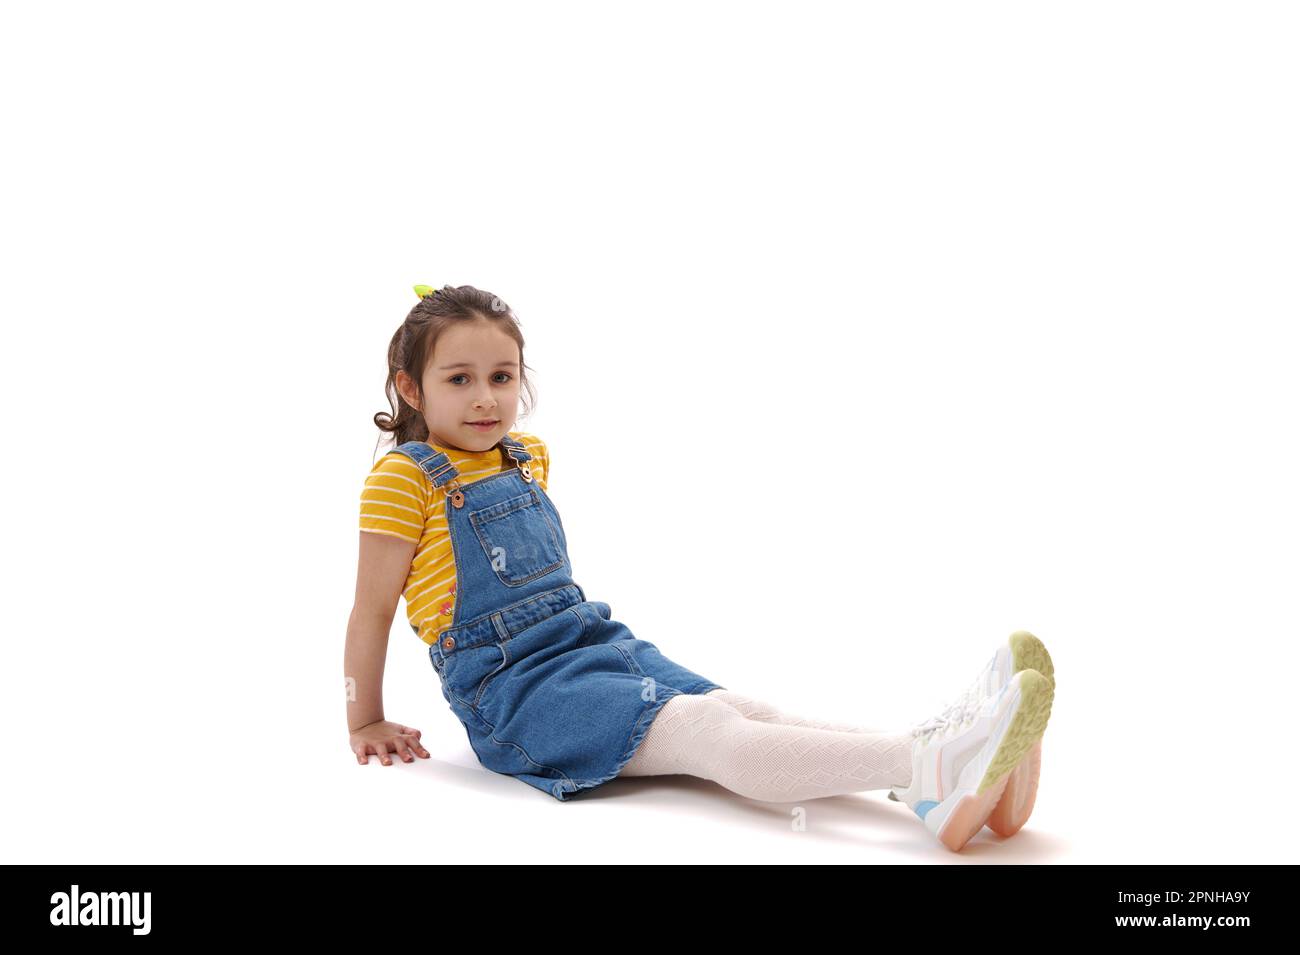 Horizontal full length portrait of Caucasian child girl looking confidently at camera, sitting on white background Stock Photo